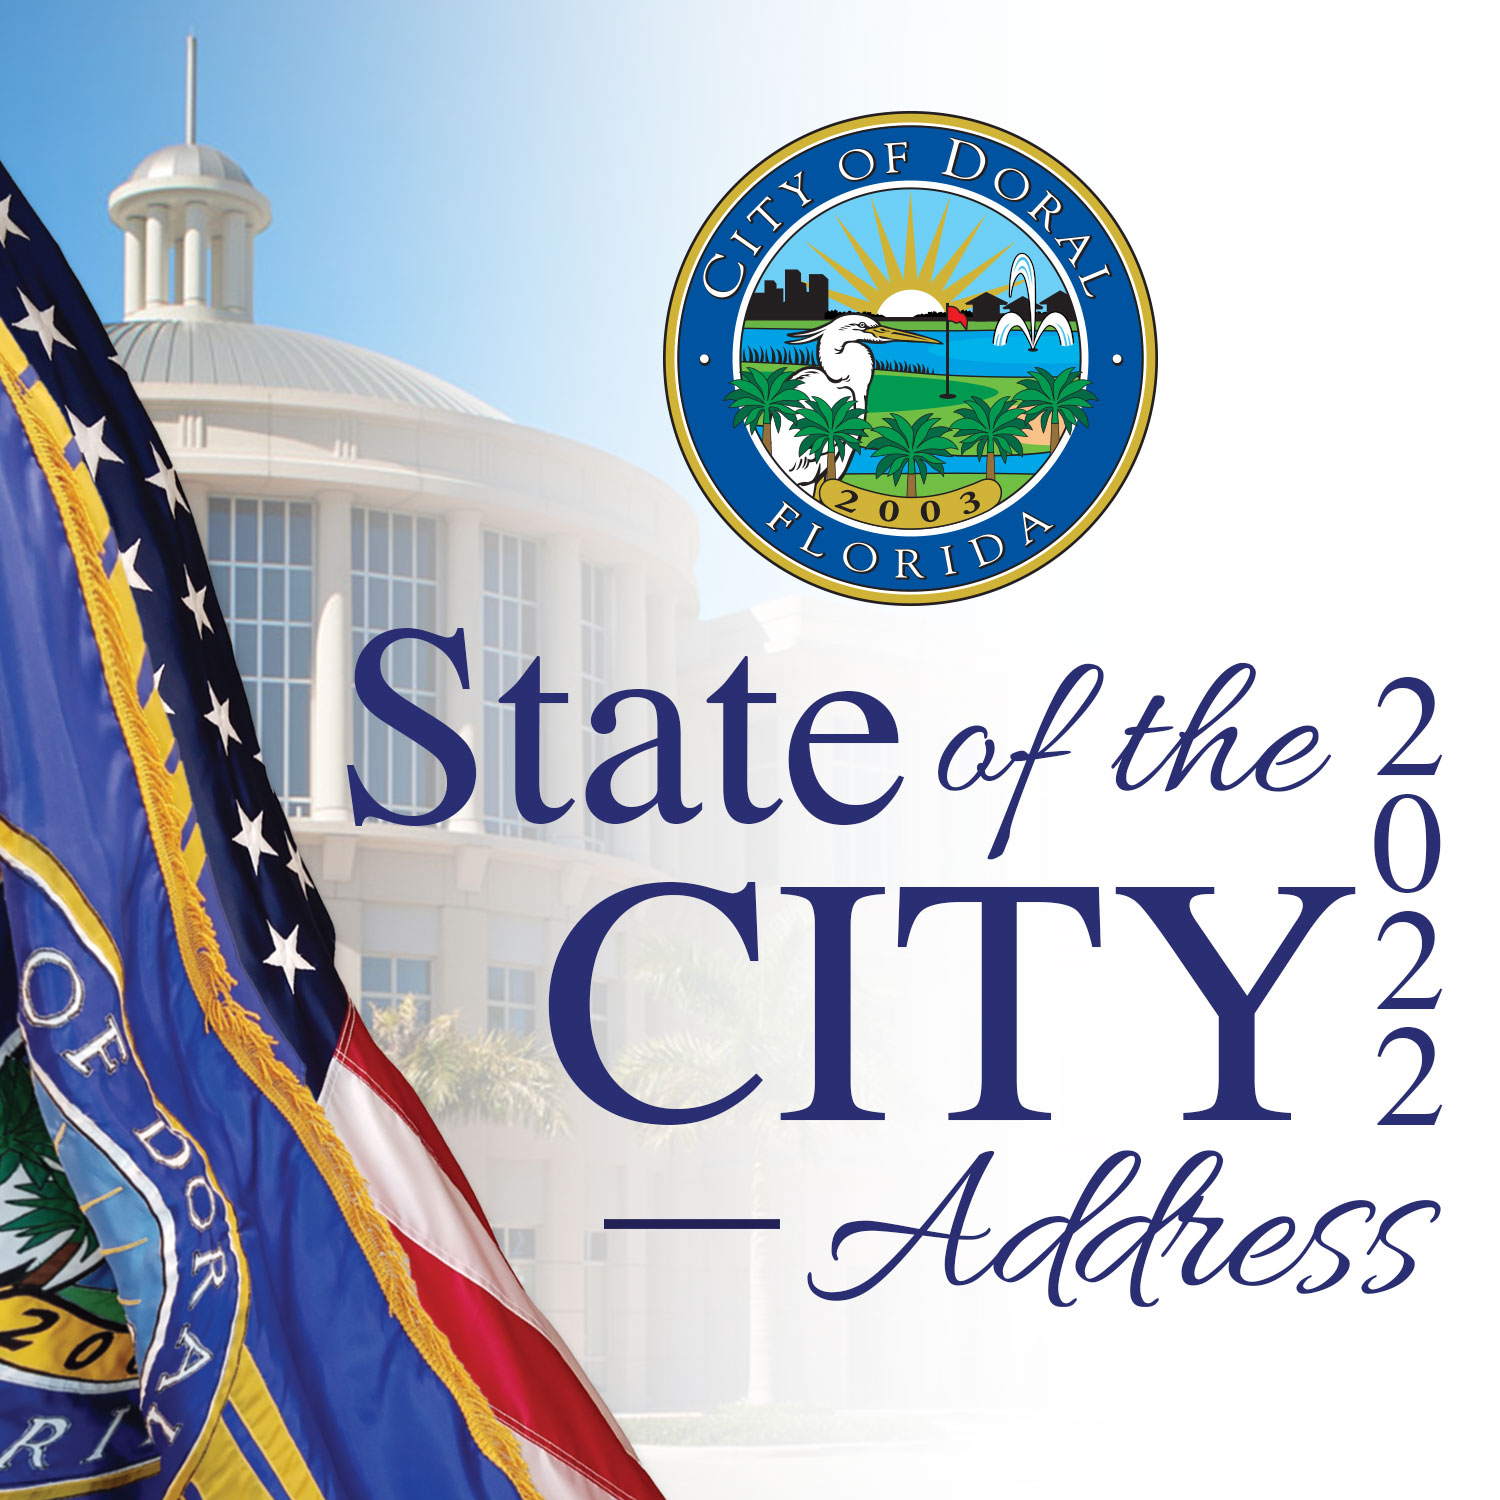 Doral’s 2022 State of the City Address